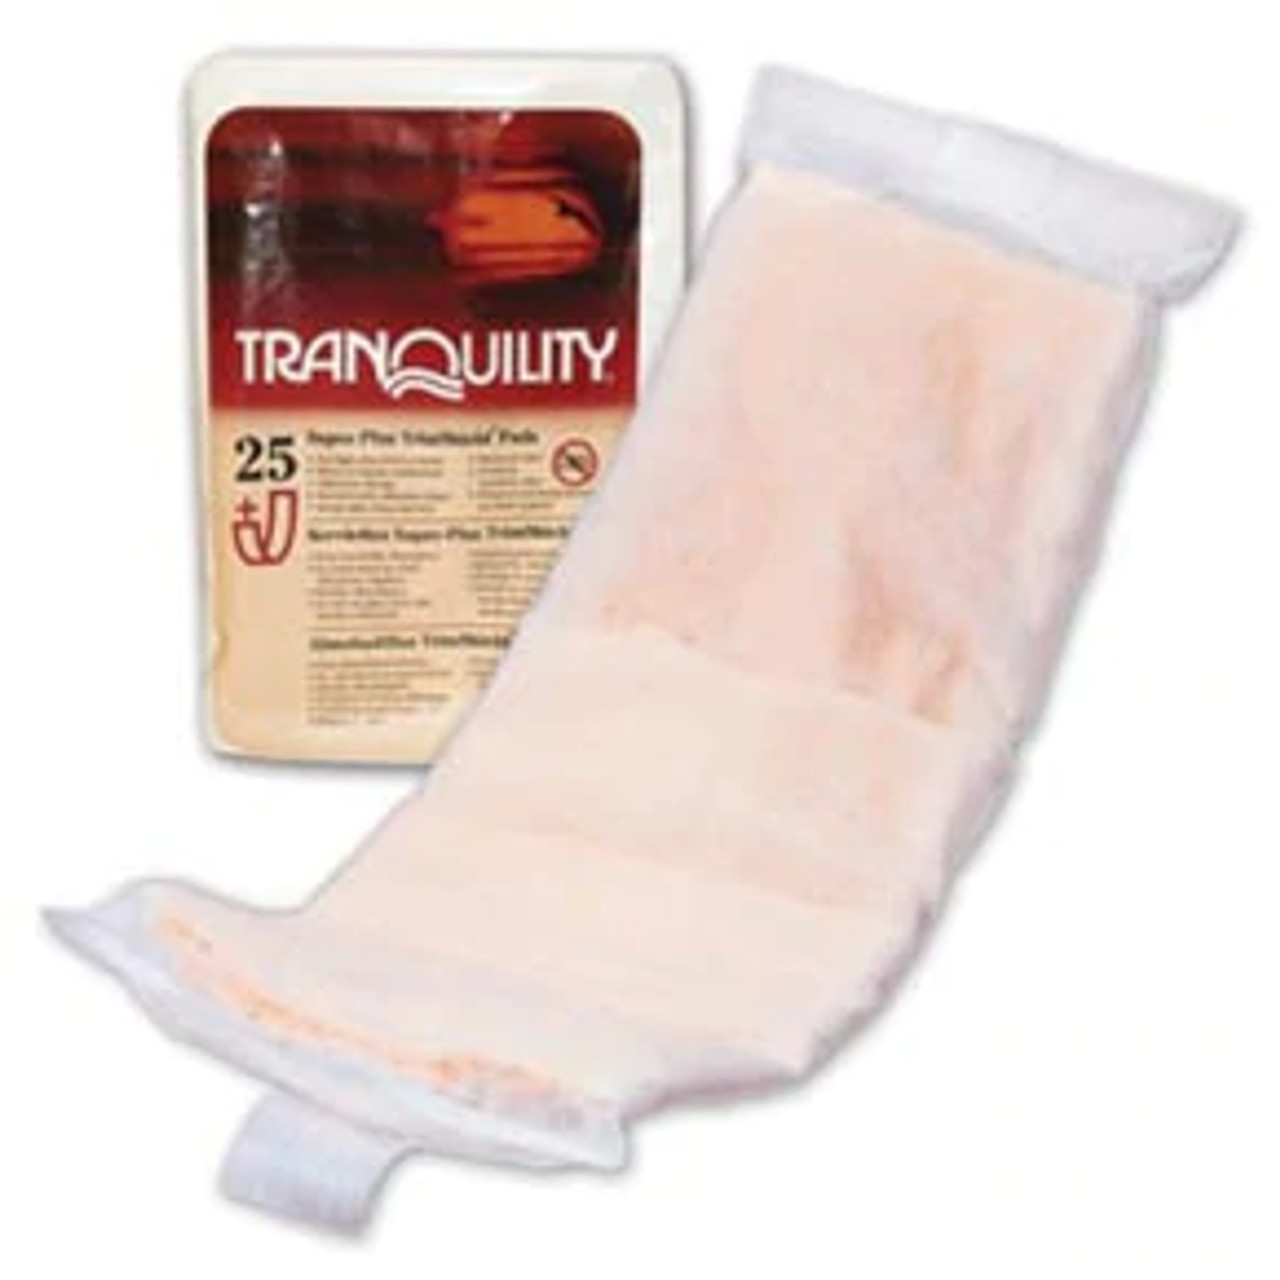 Tranquility 3096 Topliner Contour Booster Pads 3096, 10x12s